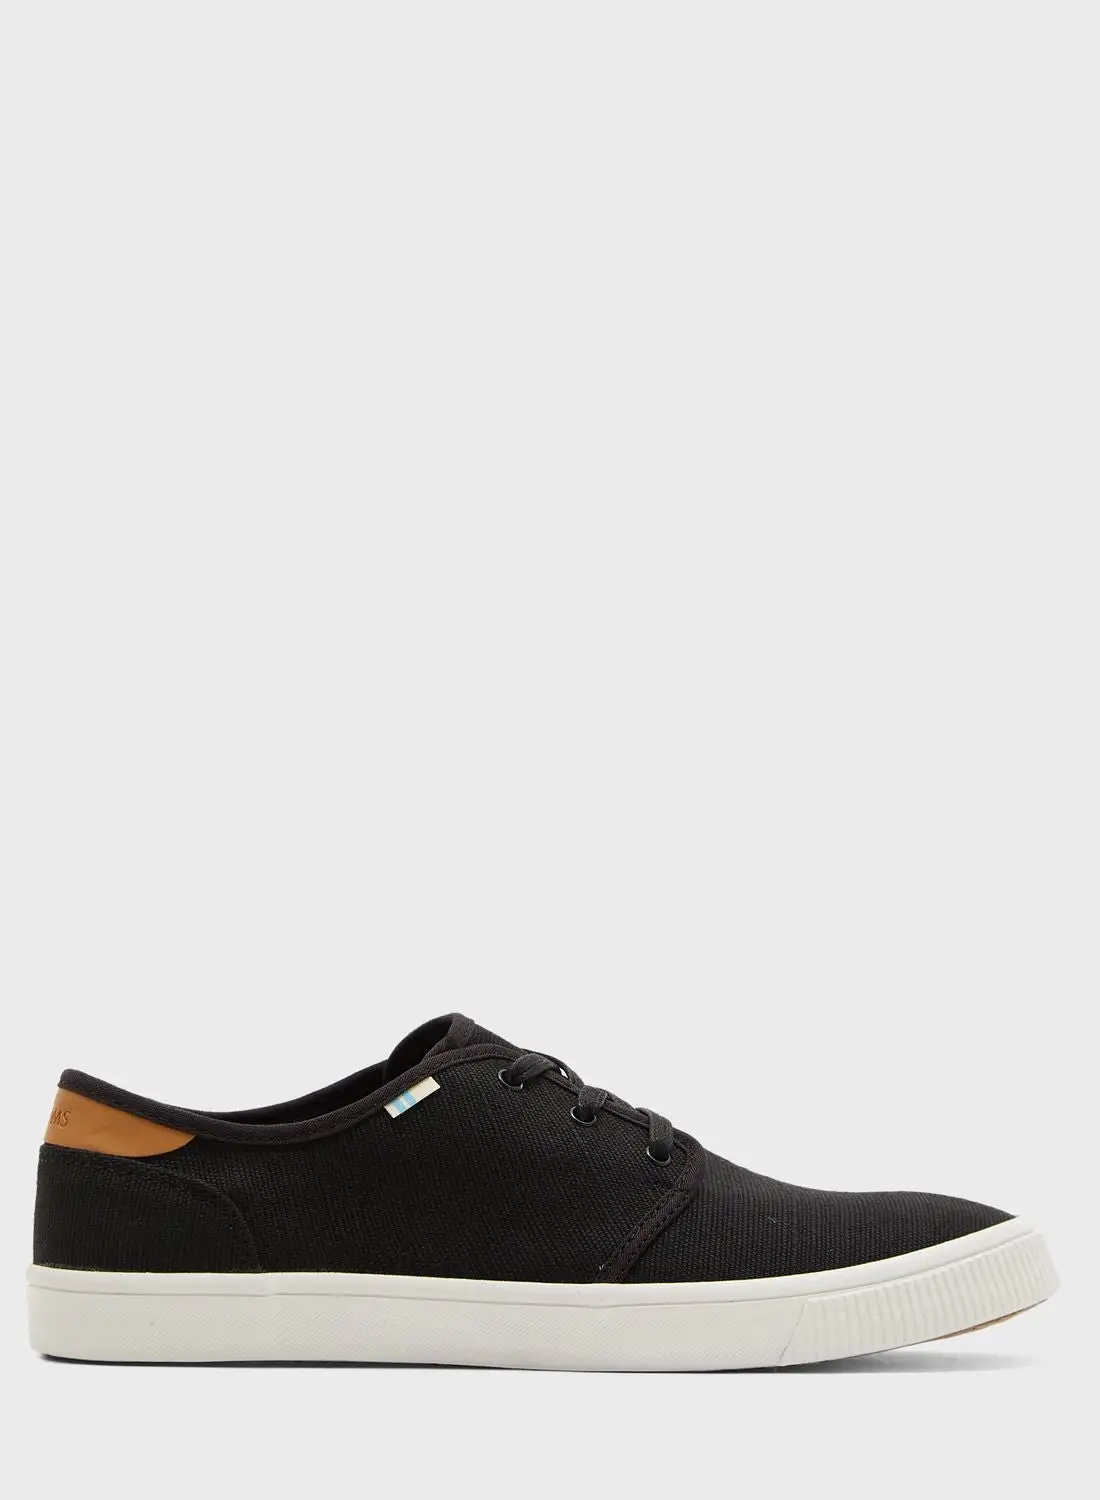 TOMS Heritage Canvas Slip Ons